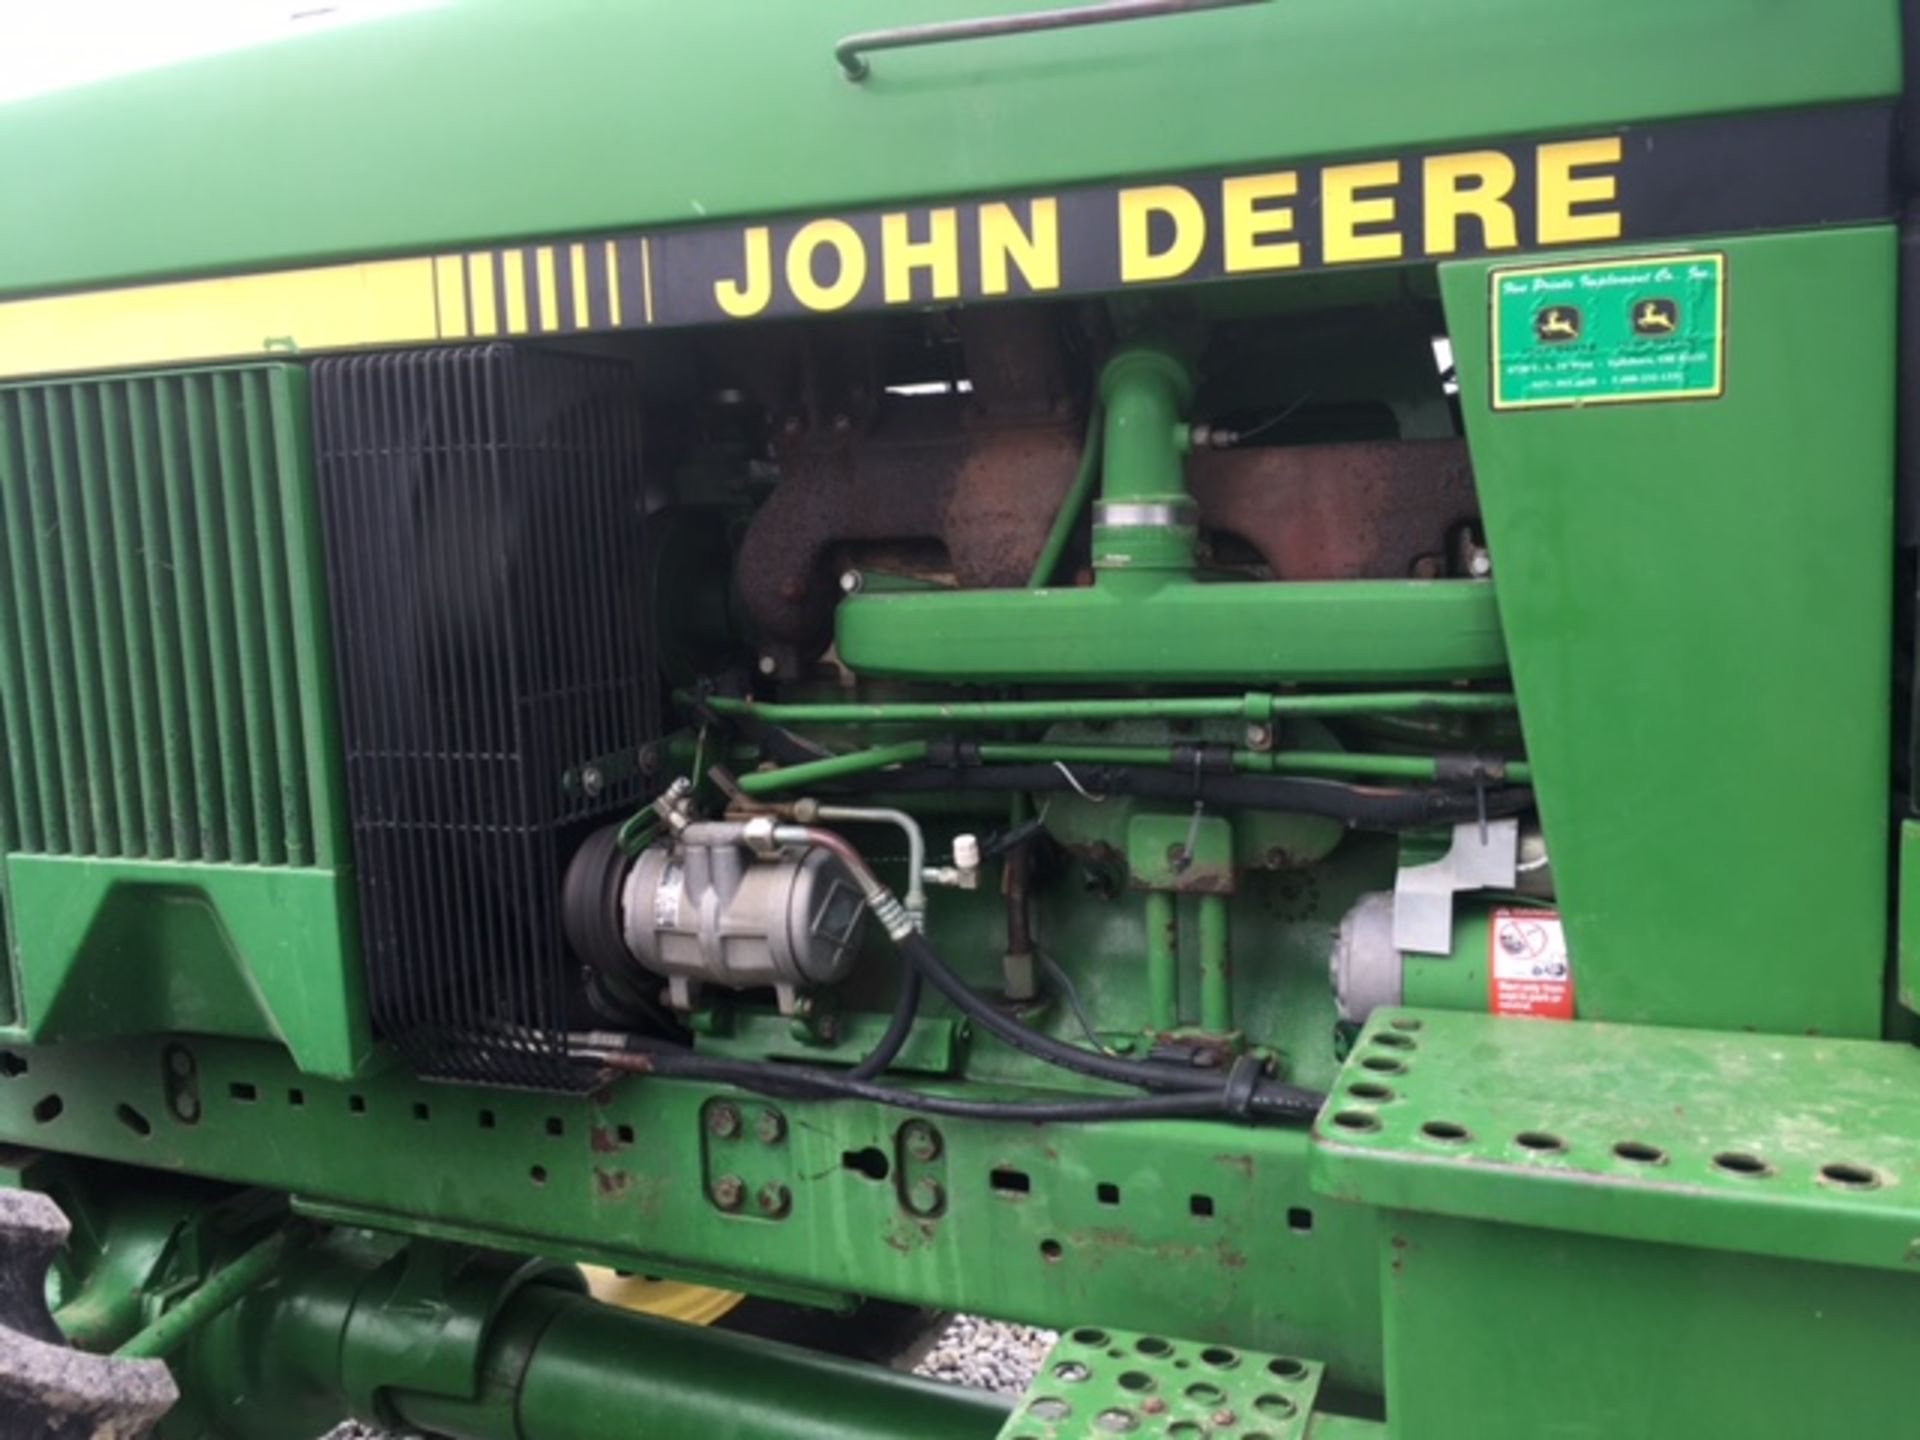 John Deere 4555 Tractor, MFWD, weights, duals, 15 speed powershift, 3pt., 3 hyd. remotes, big 1000 - Image 4 of 13